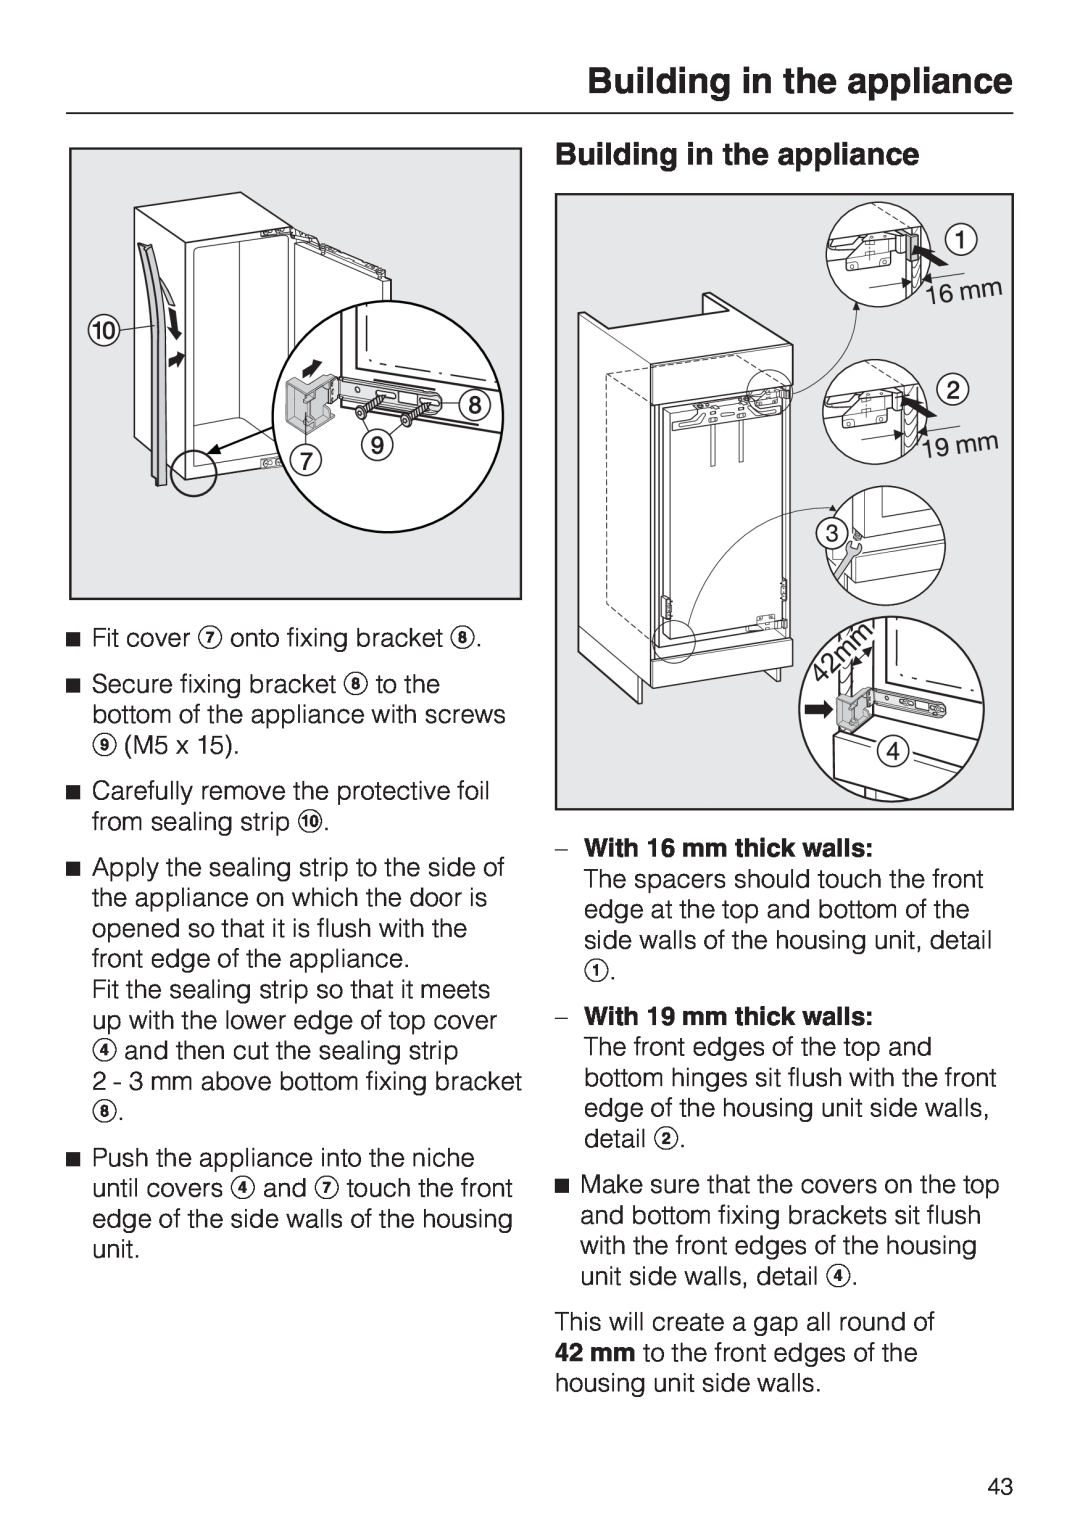 Miele K9552, K9752 installation instructions Building in the appliance, With 16 mm thick walls, With 19 mm thick walls 